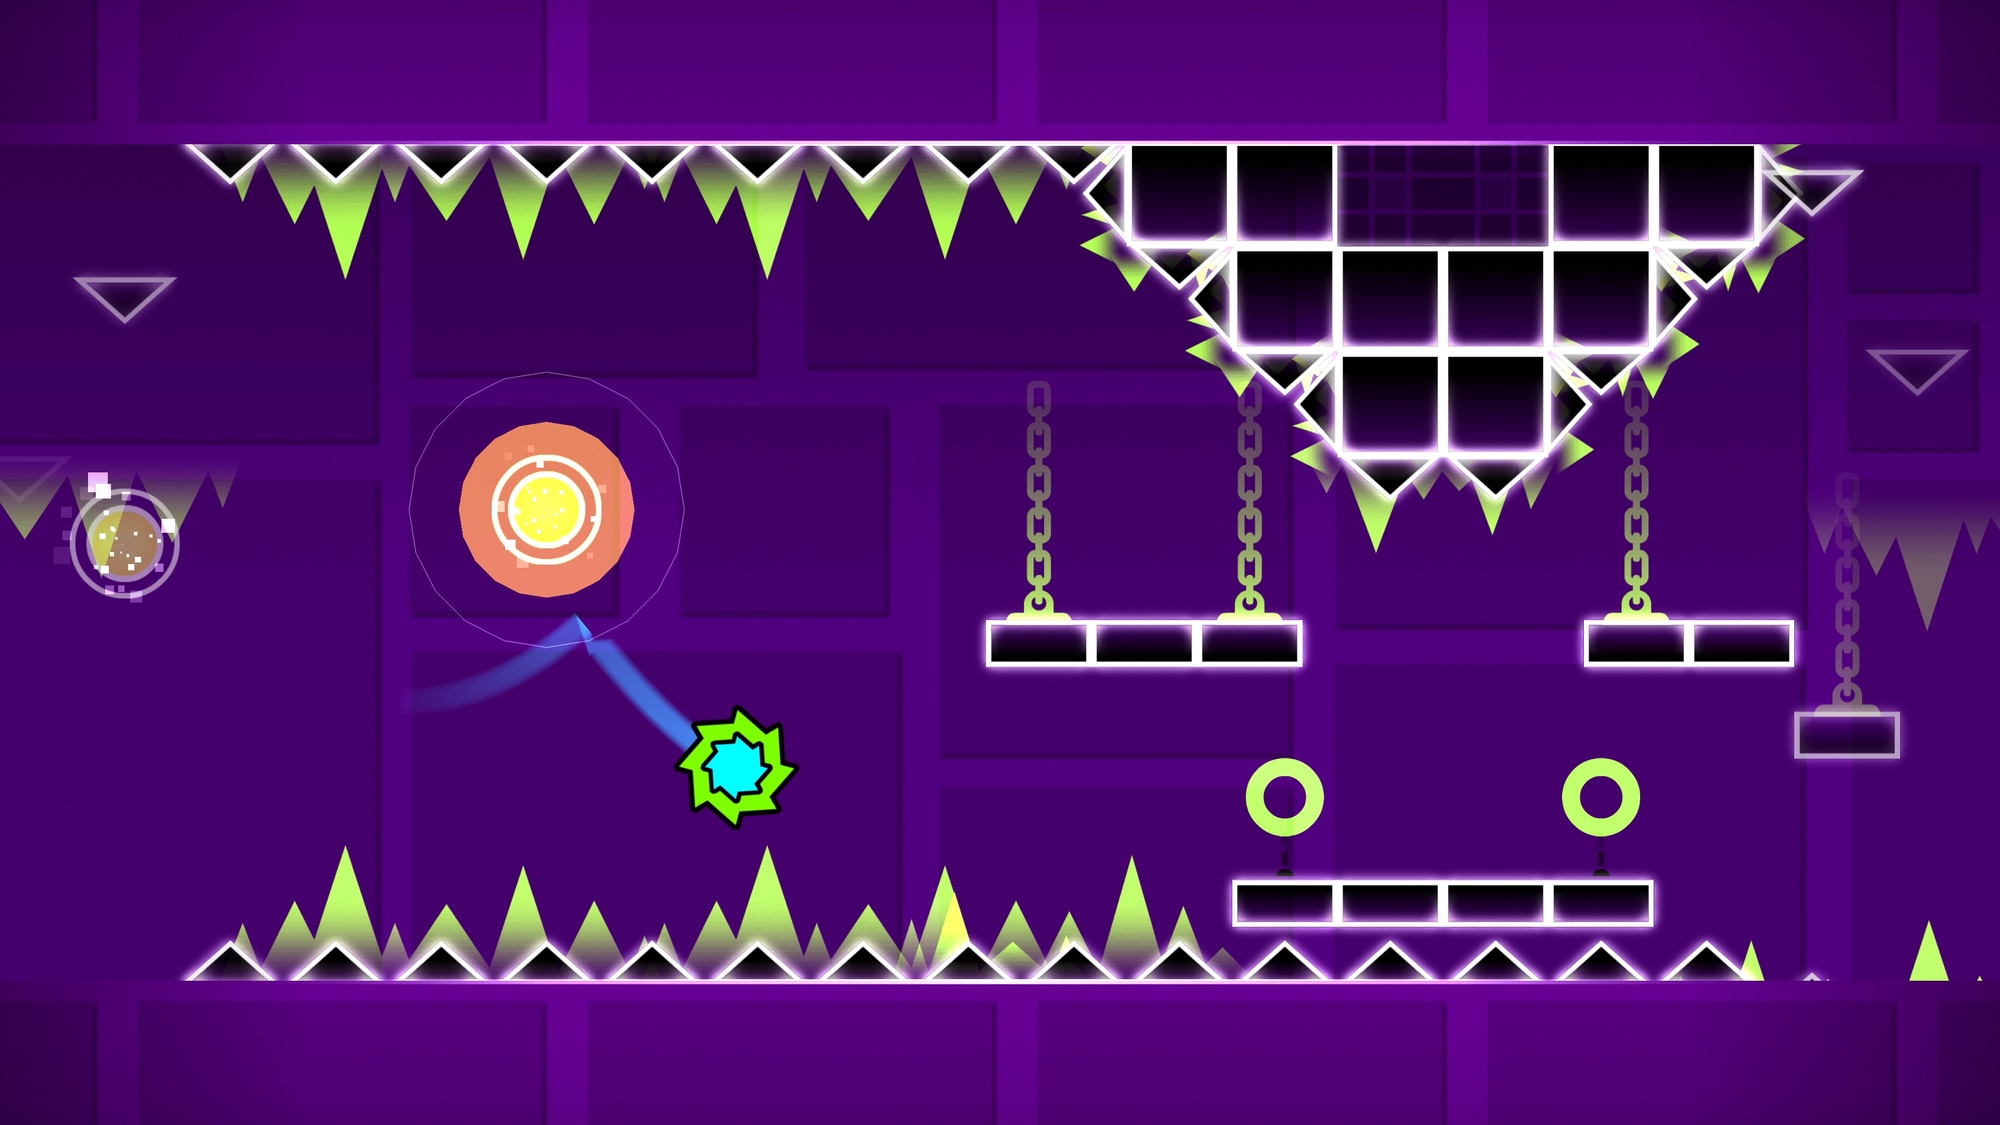 7 Years Of Geometry Dash Game Design History 30 Images Version